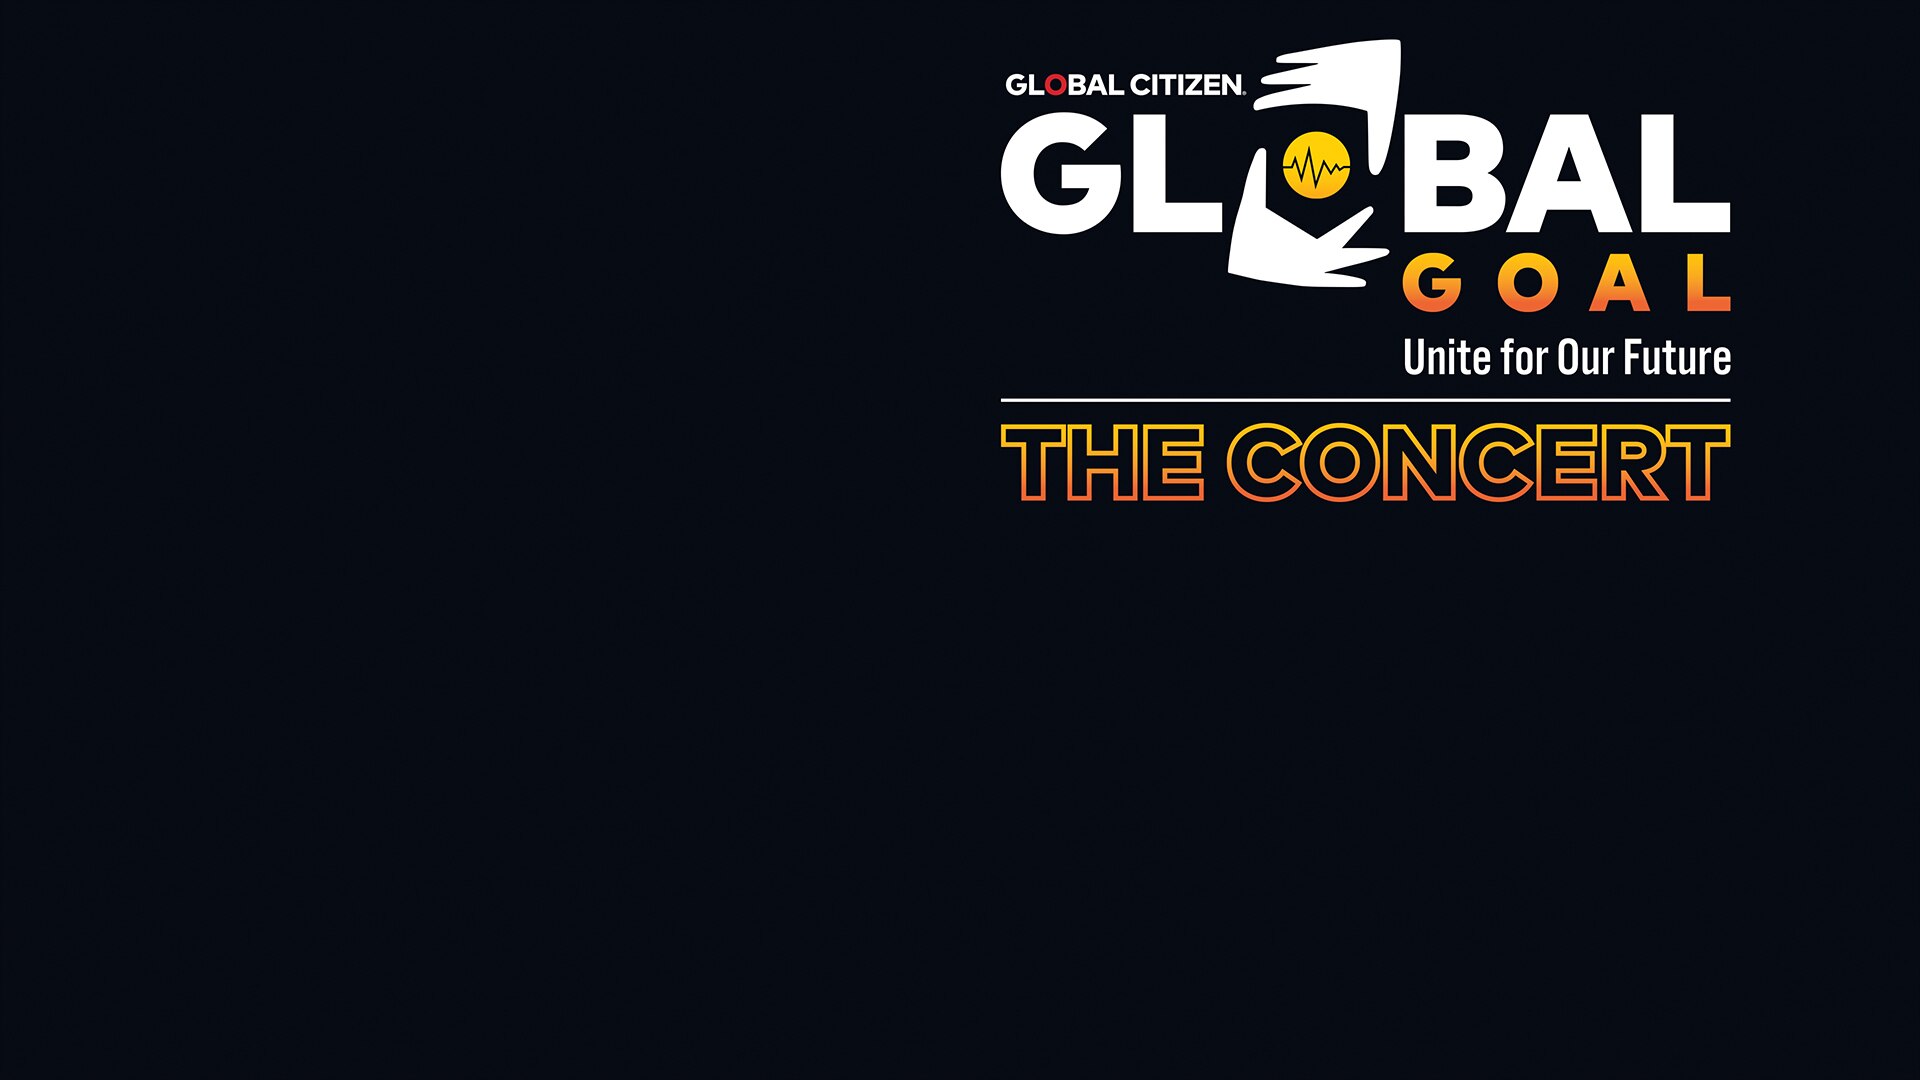 Global Citizen - The #GlobalGoalUnite Concert is this Saturday at 8pm ET on  NBC! The concert will feature music performances, expert insights, and  commitments from government & corporate leaders to support the